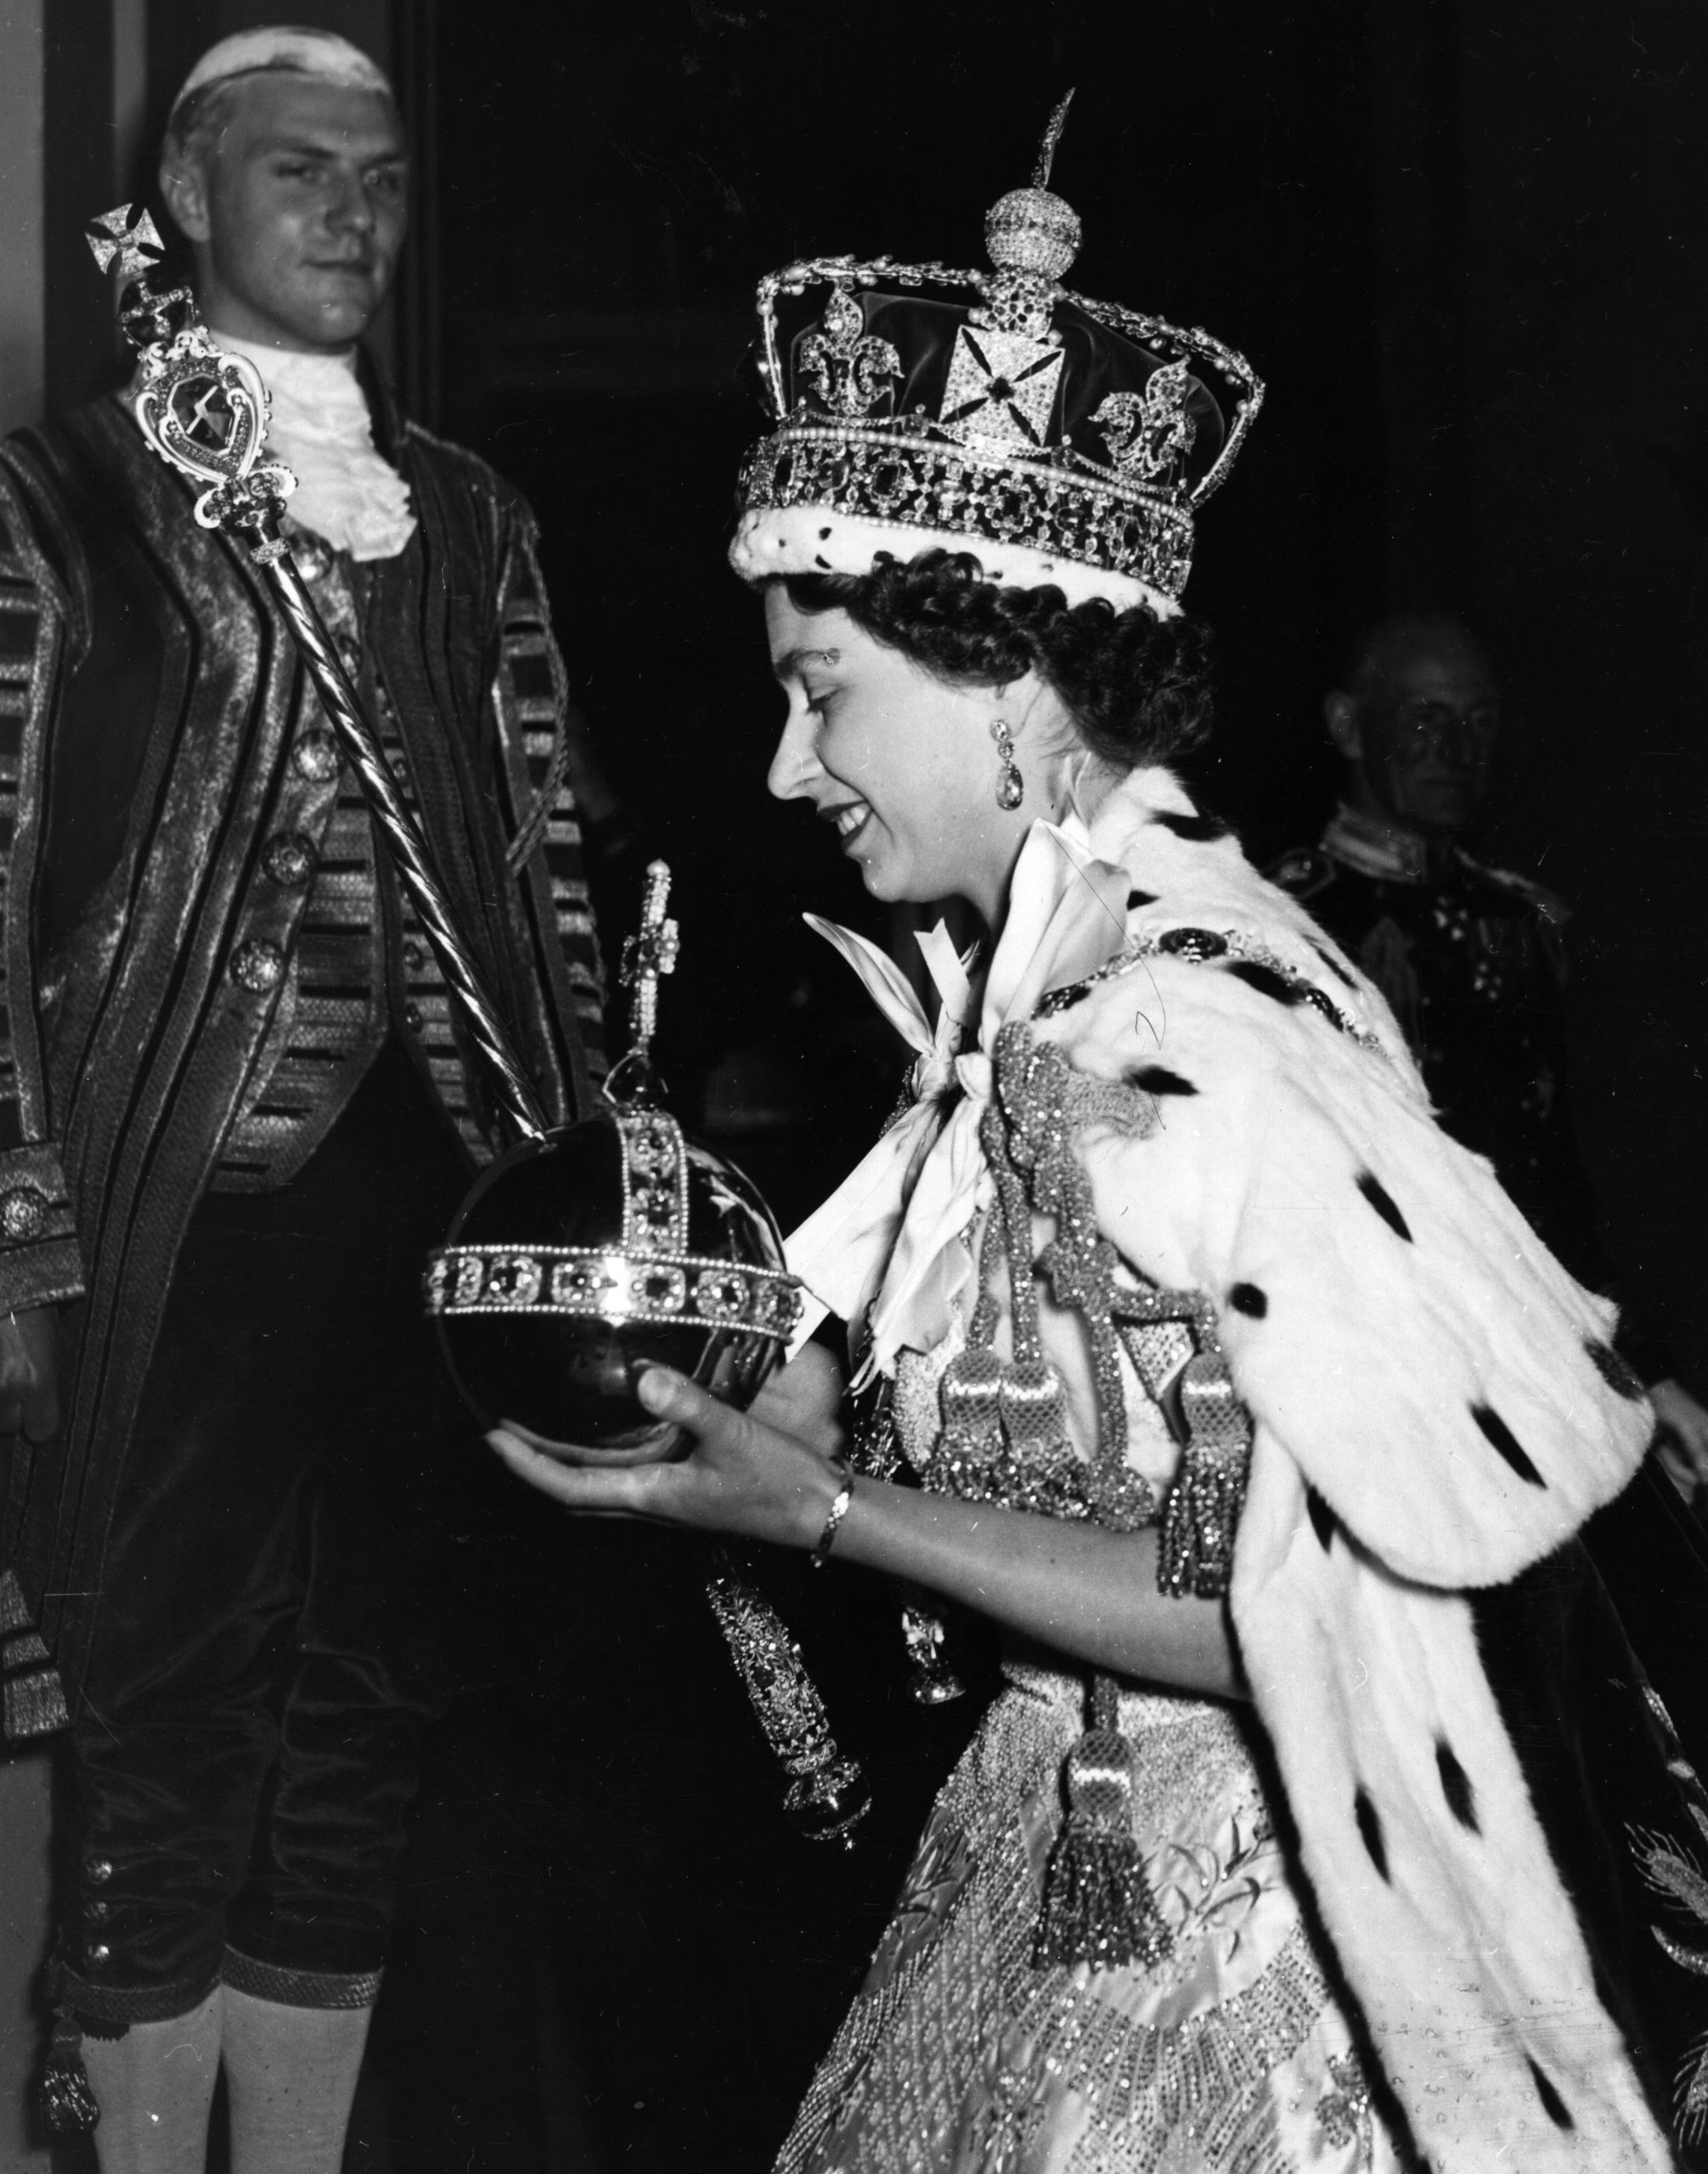 Queen Elizabeth II wearing the Imperial state Crown and carrying the Orb and sceptre, leaving the state coach and entering Buckingham Palace, after the coronation.